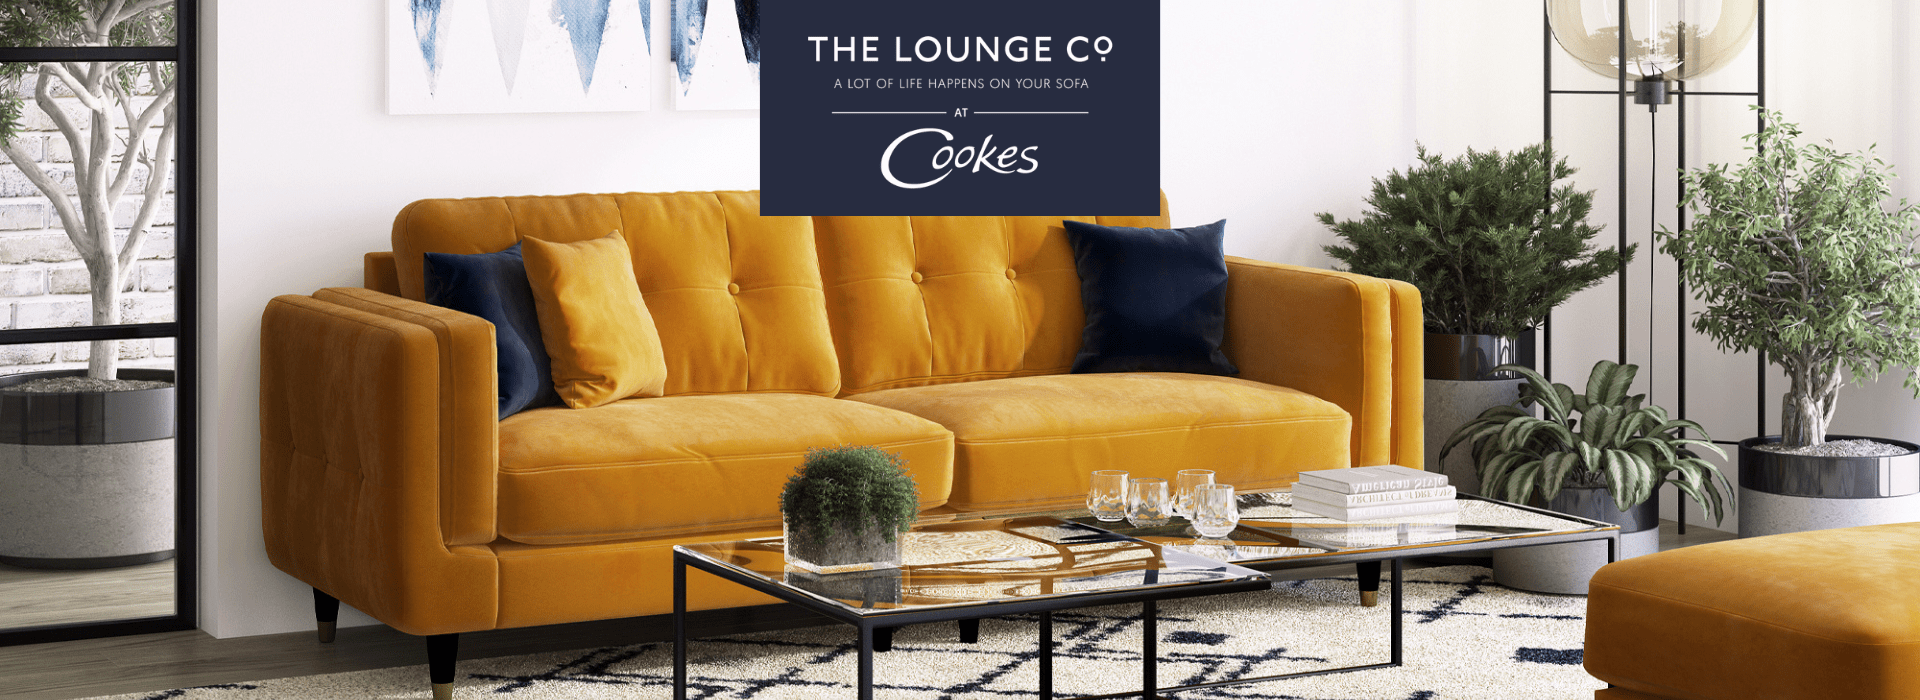 The Lounge Co Madison Landing Page Banner 